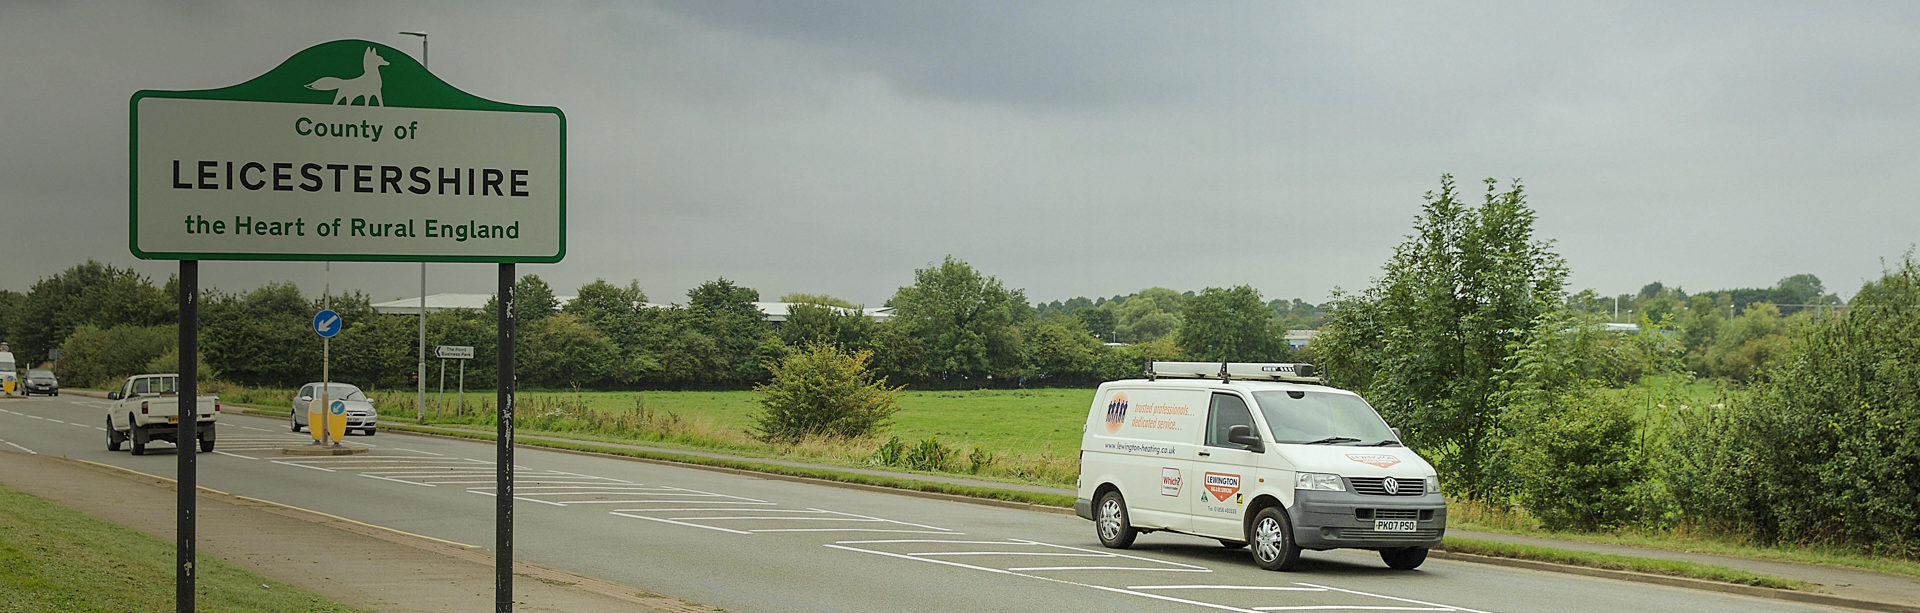 White plumbers van driving into Leicestershire